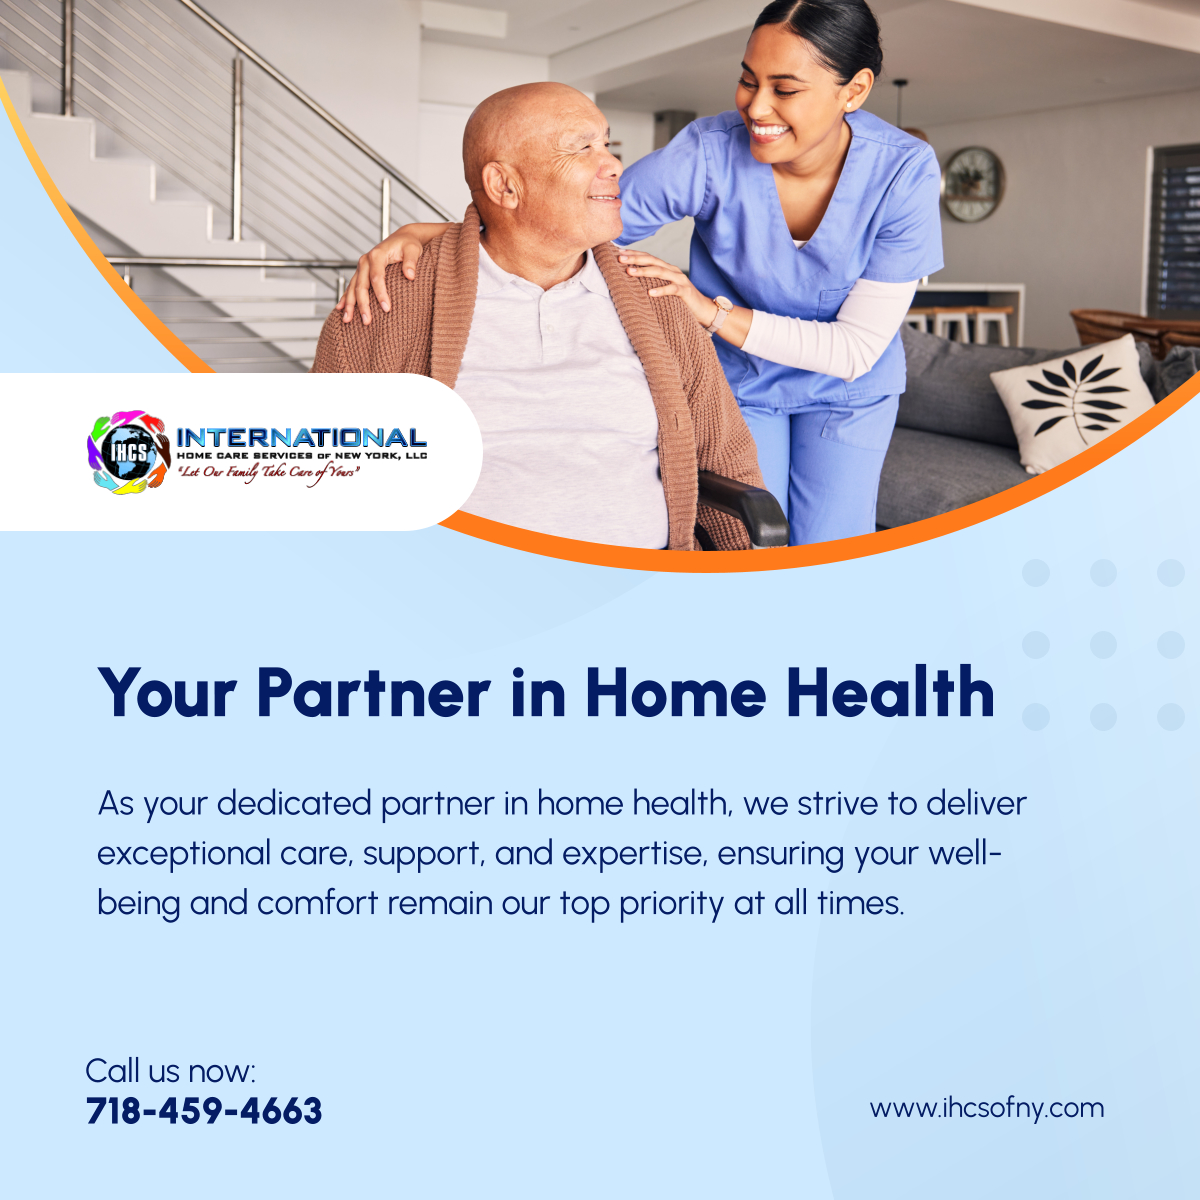 Join hands with us as your trusted partner in home health, where your needs are met with compassion, expertise, and unwavering commitment to your health and happiness. 

#CounselingServices #HomeHealthCare #RegoParkNY #SeniorCare #ElderlyCare #HomeCare #IHCSOfNY #TrustedPartner